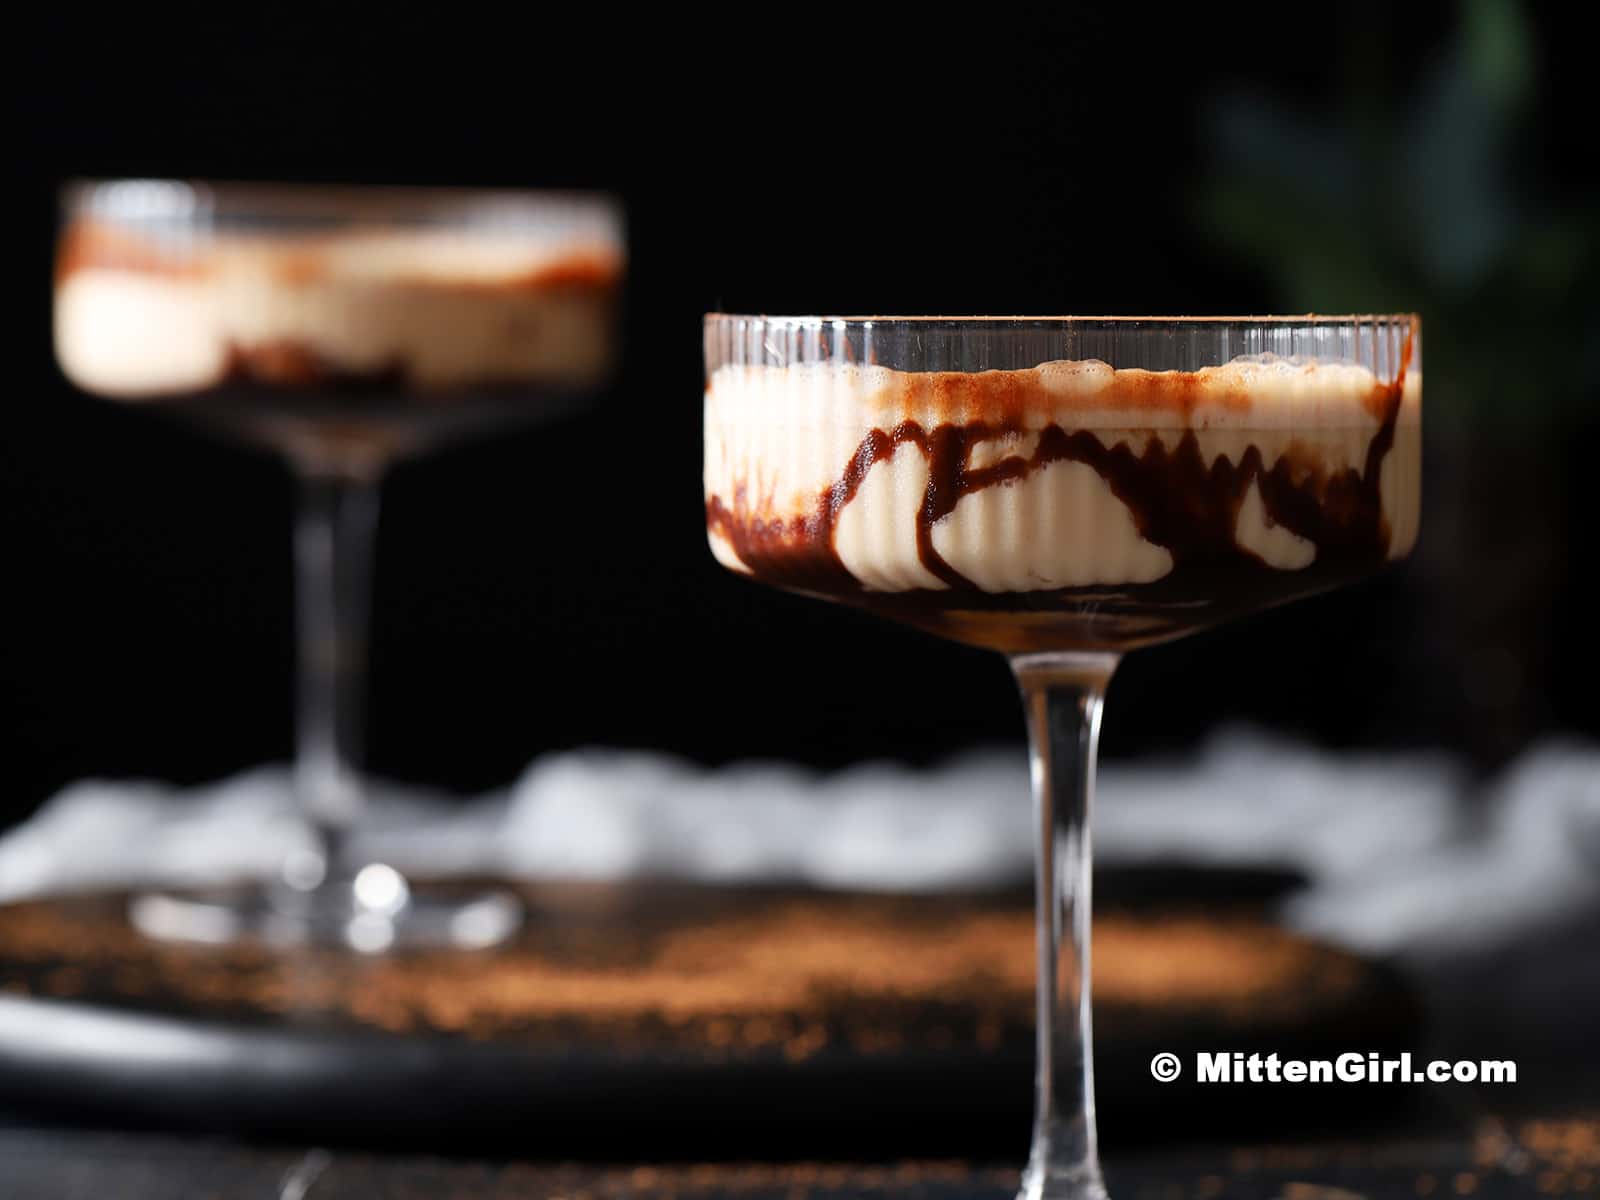 Glasses swirled with chocolate sauce and filled with chocolate caramel martini.